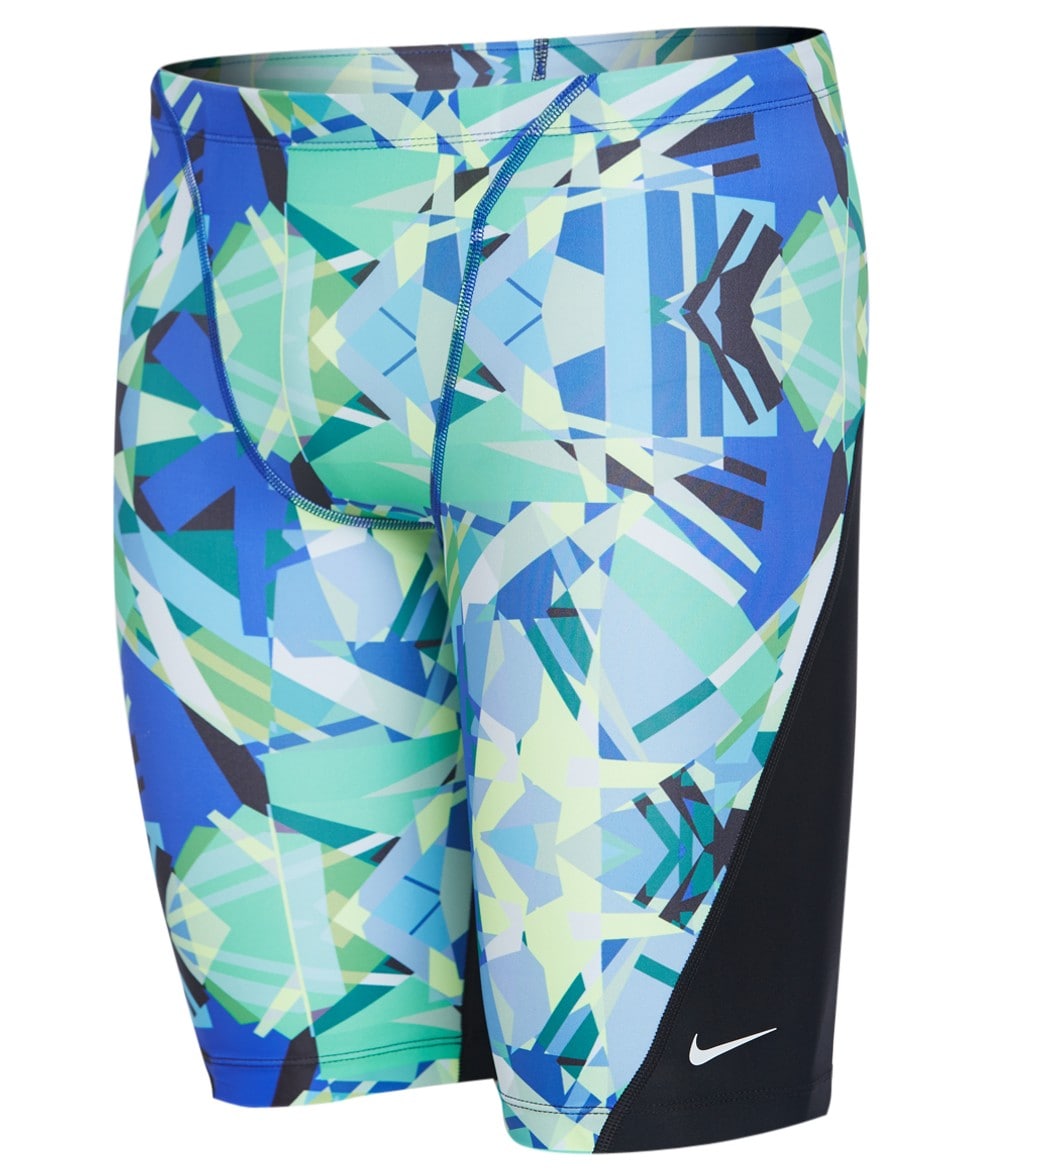 Nike Men's Prisma Punch Jammer Swimsuit at SwimOutlet.com